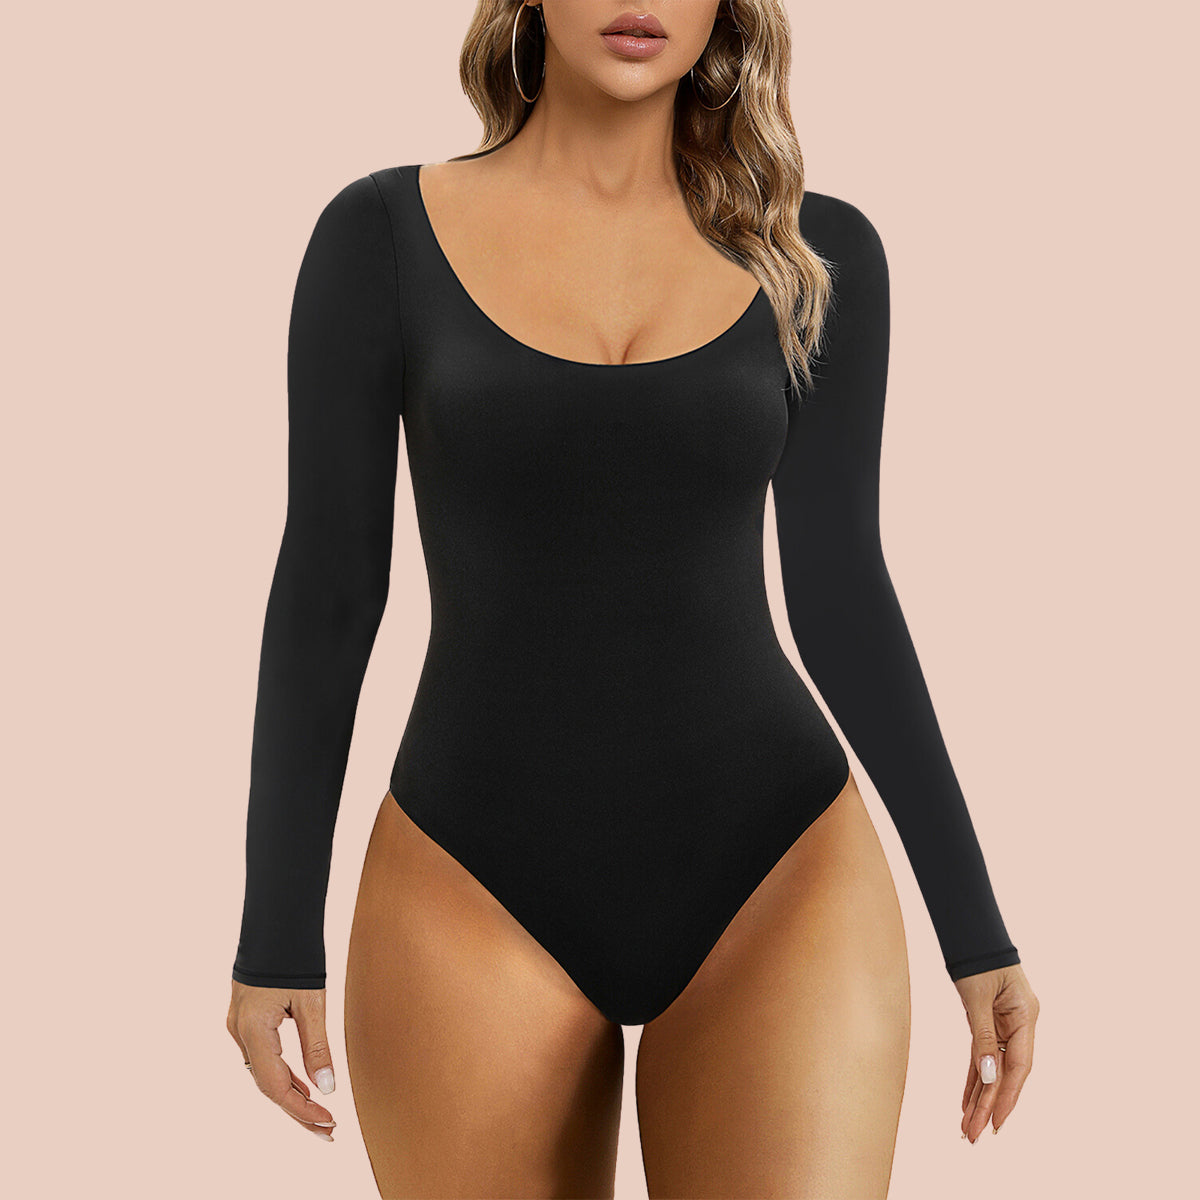 Shaperx best selling viral bodysuit limited time sales on  this